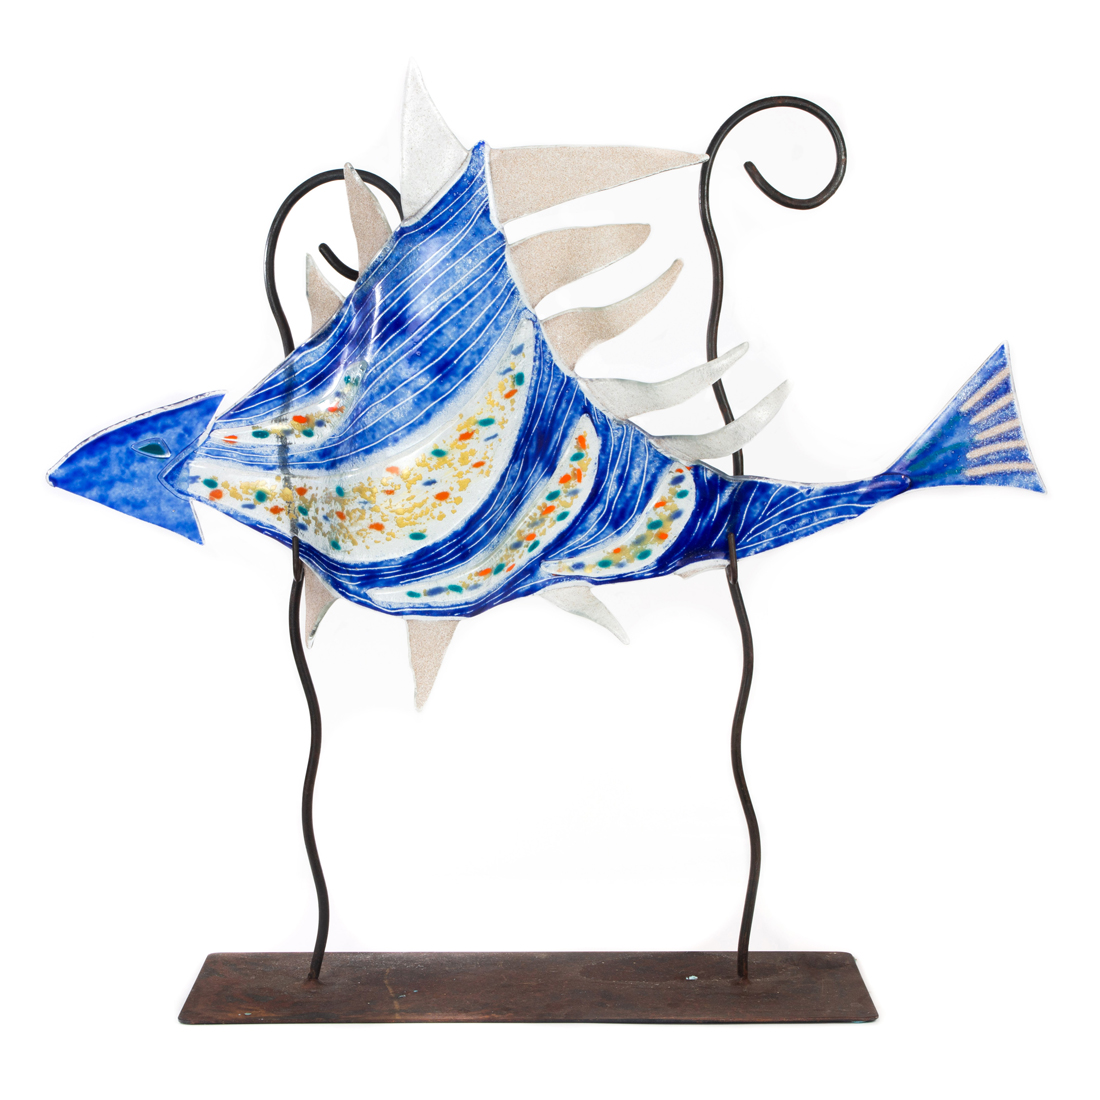 A LARGE ART GLASS FISH ON IRON 2d30af